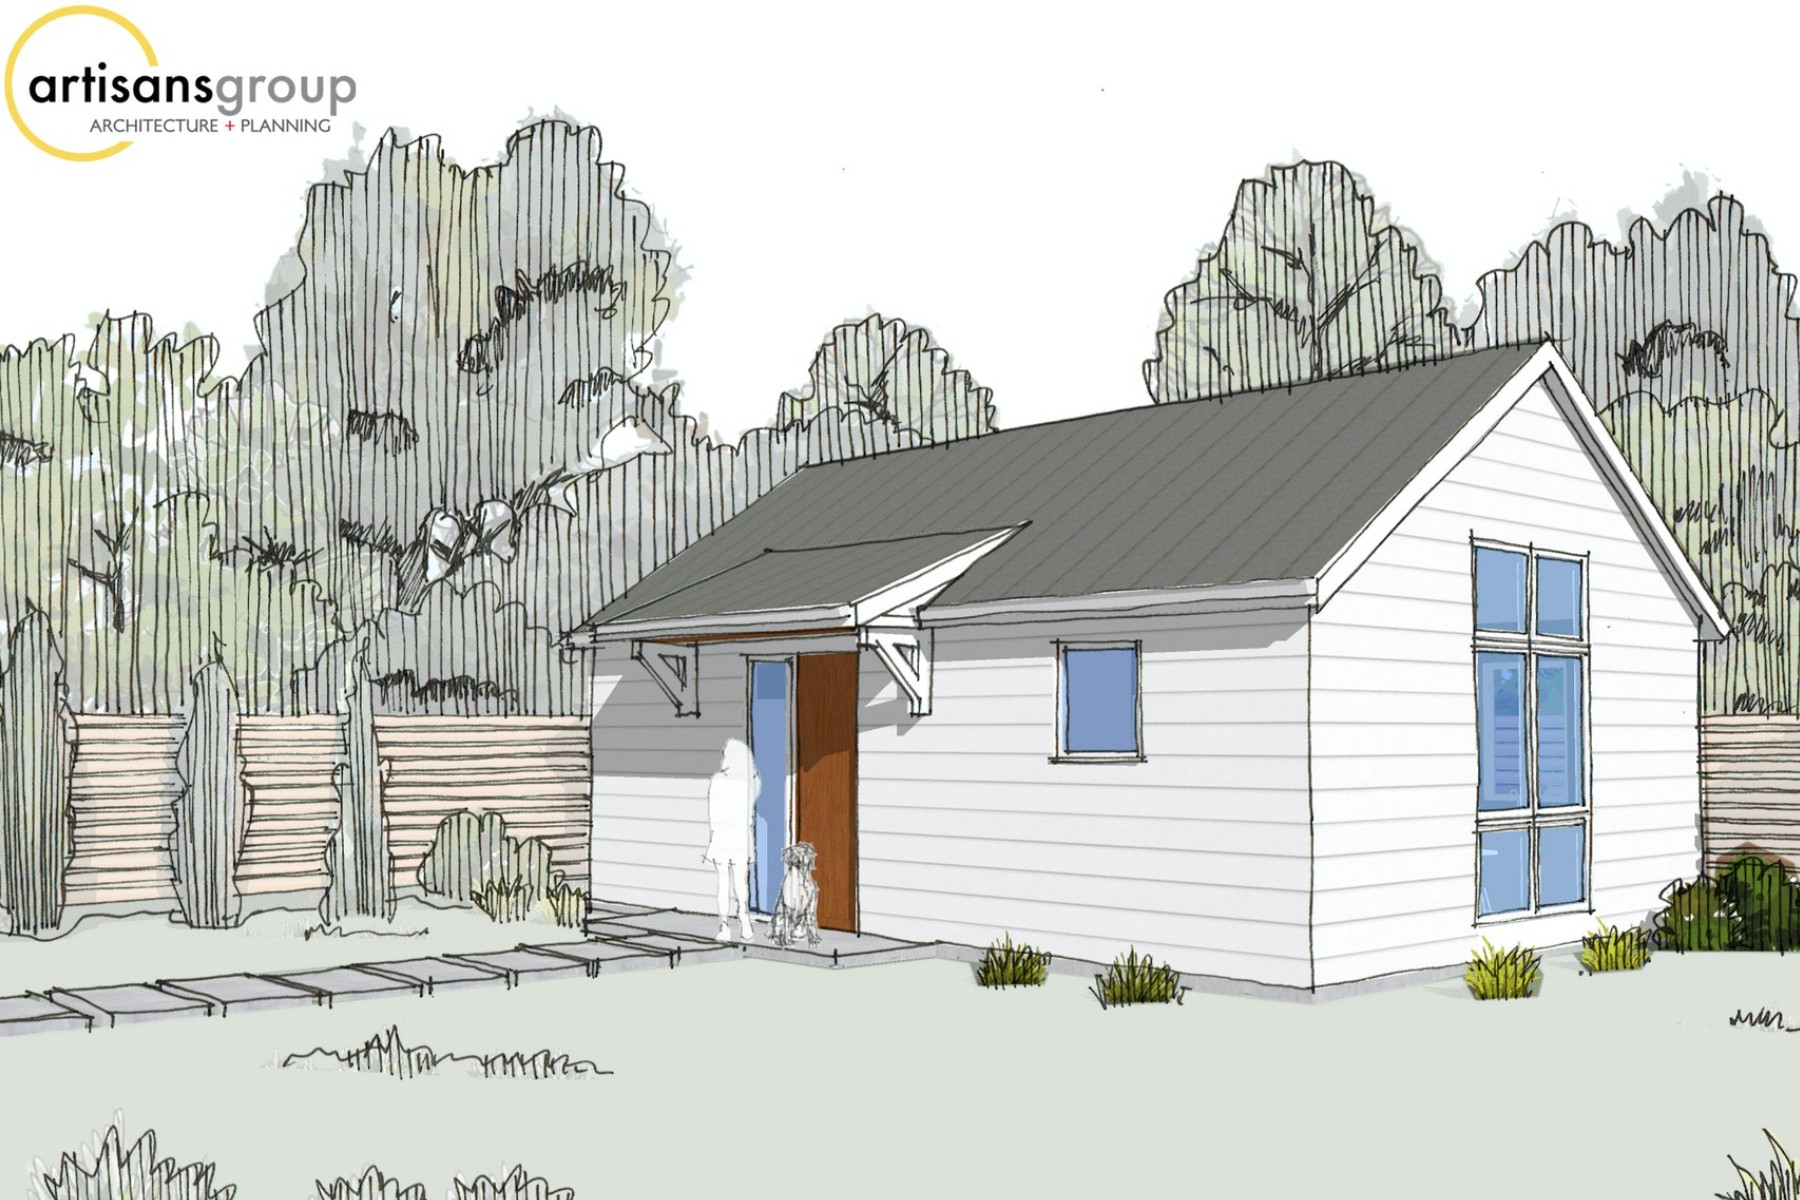 ADU plan from The Artisans Group in Olympia, Washington